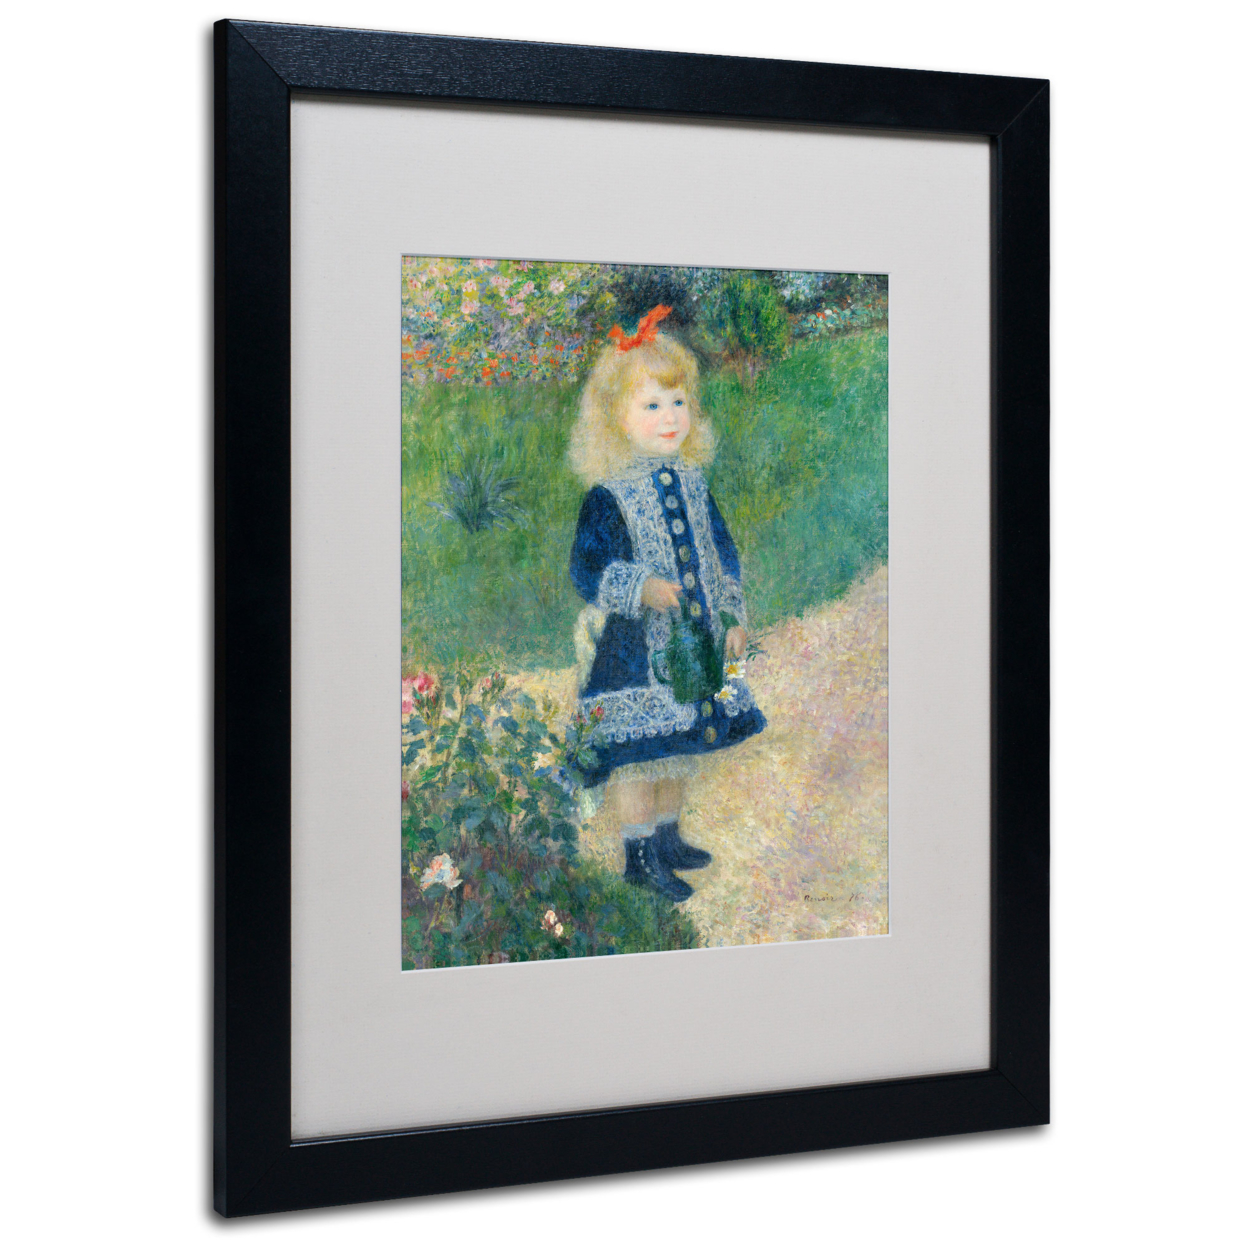 Pierre Renoir 'A Girl With A Watering Can' Black Wooden Framed Art 18 X 22 Inches